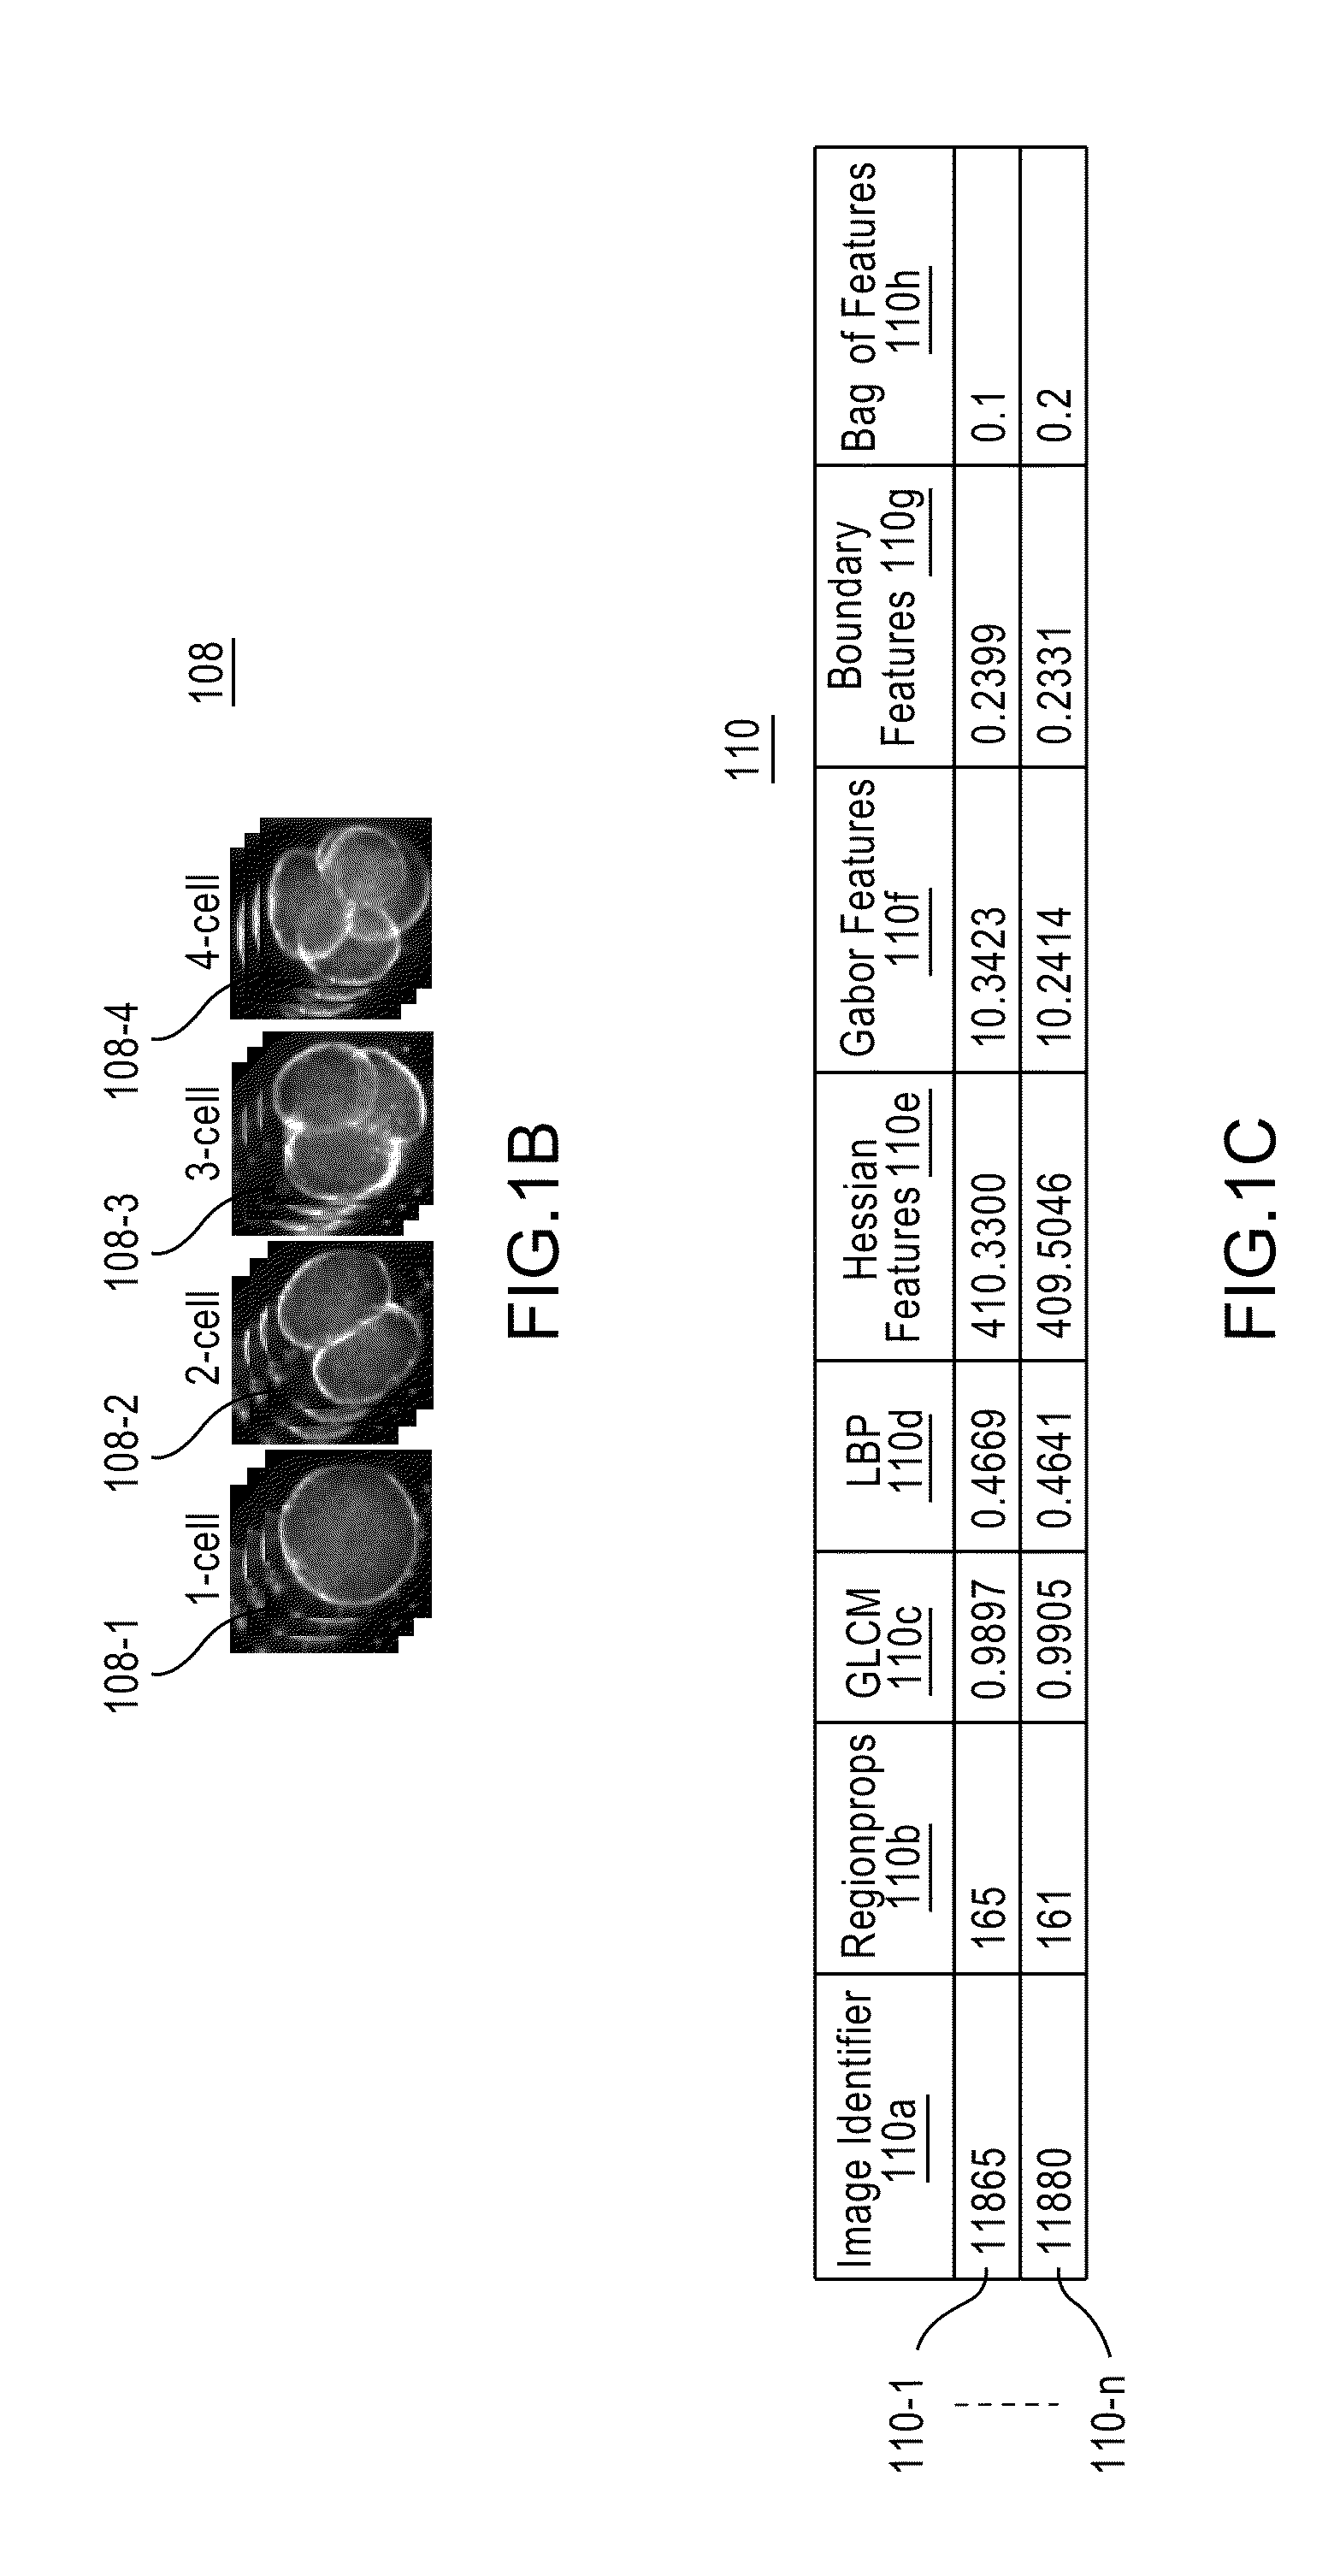 Apparatus, method, and system for image-based human embryo cell classification